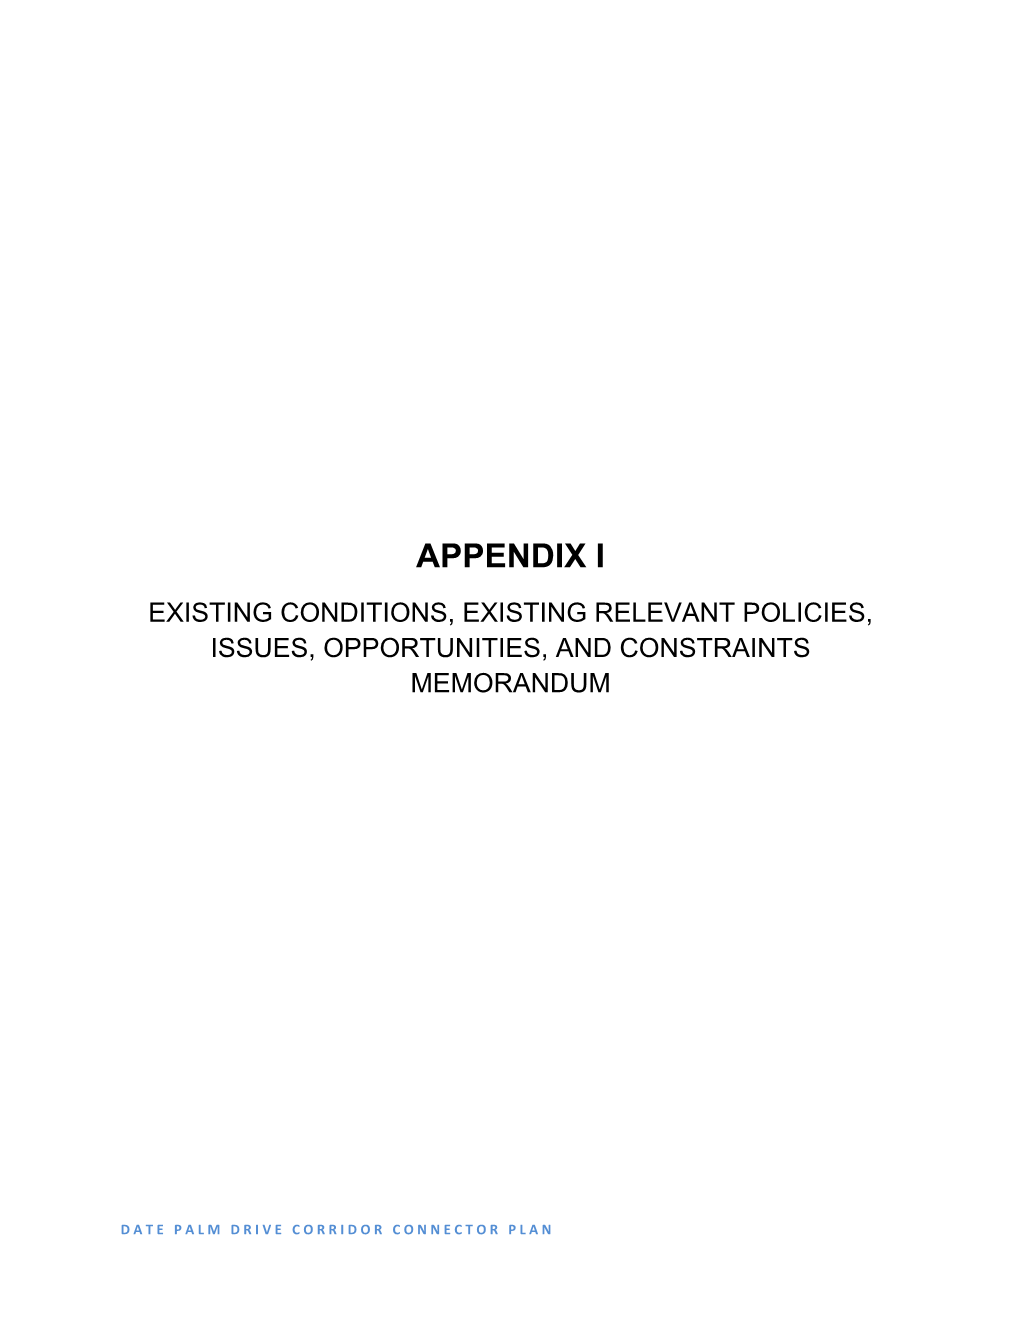 Appendix I Existing Conditions, Existing Relevant Policies, Issues, Opportunities, and Constraints Memorandum